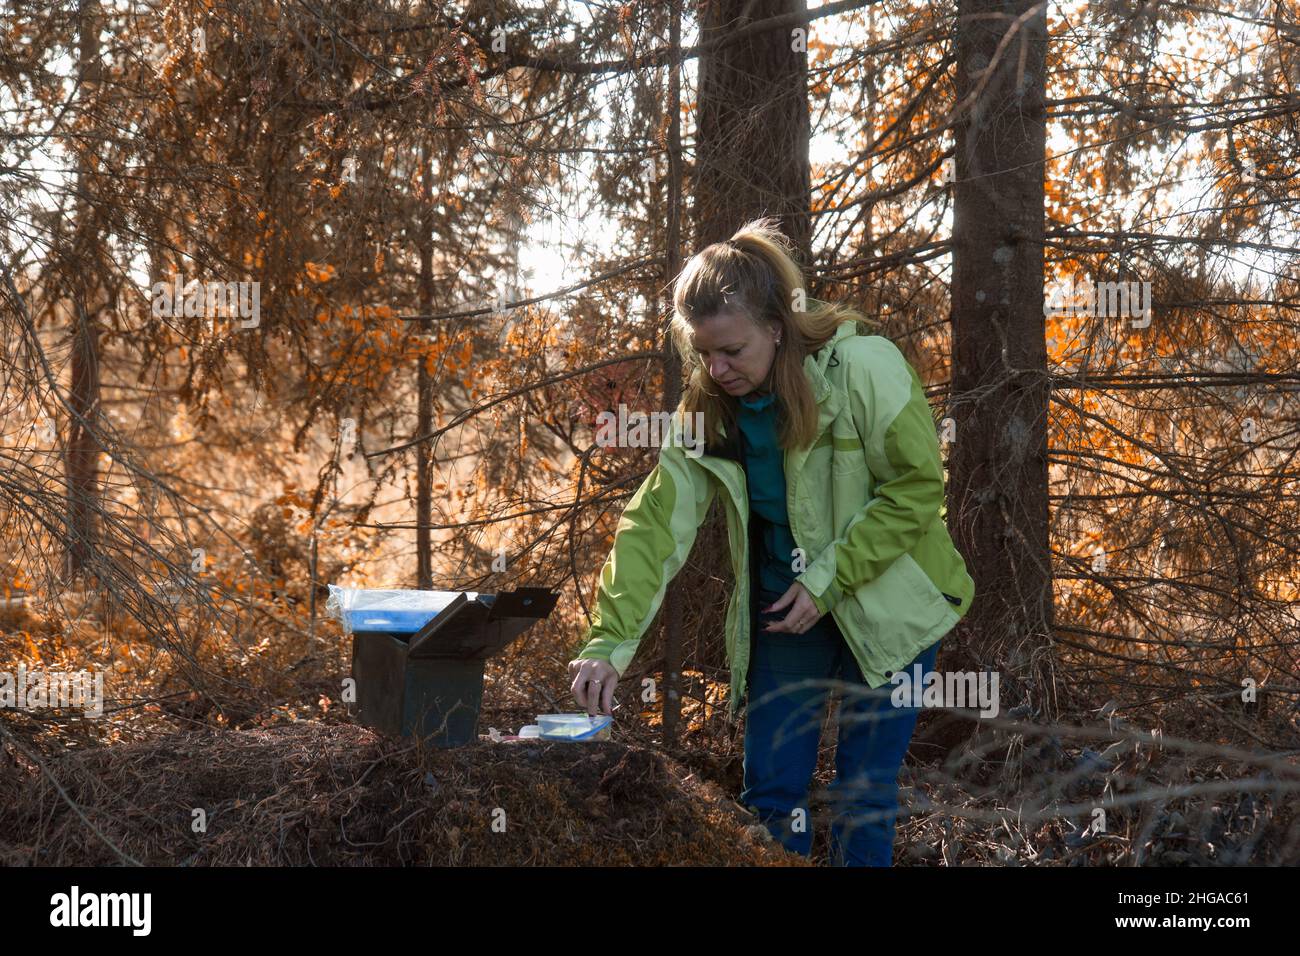 A woman geocaching. Women in woods find geocache container.  Stock Photo